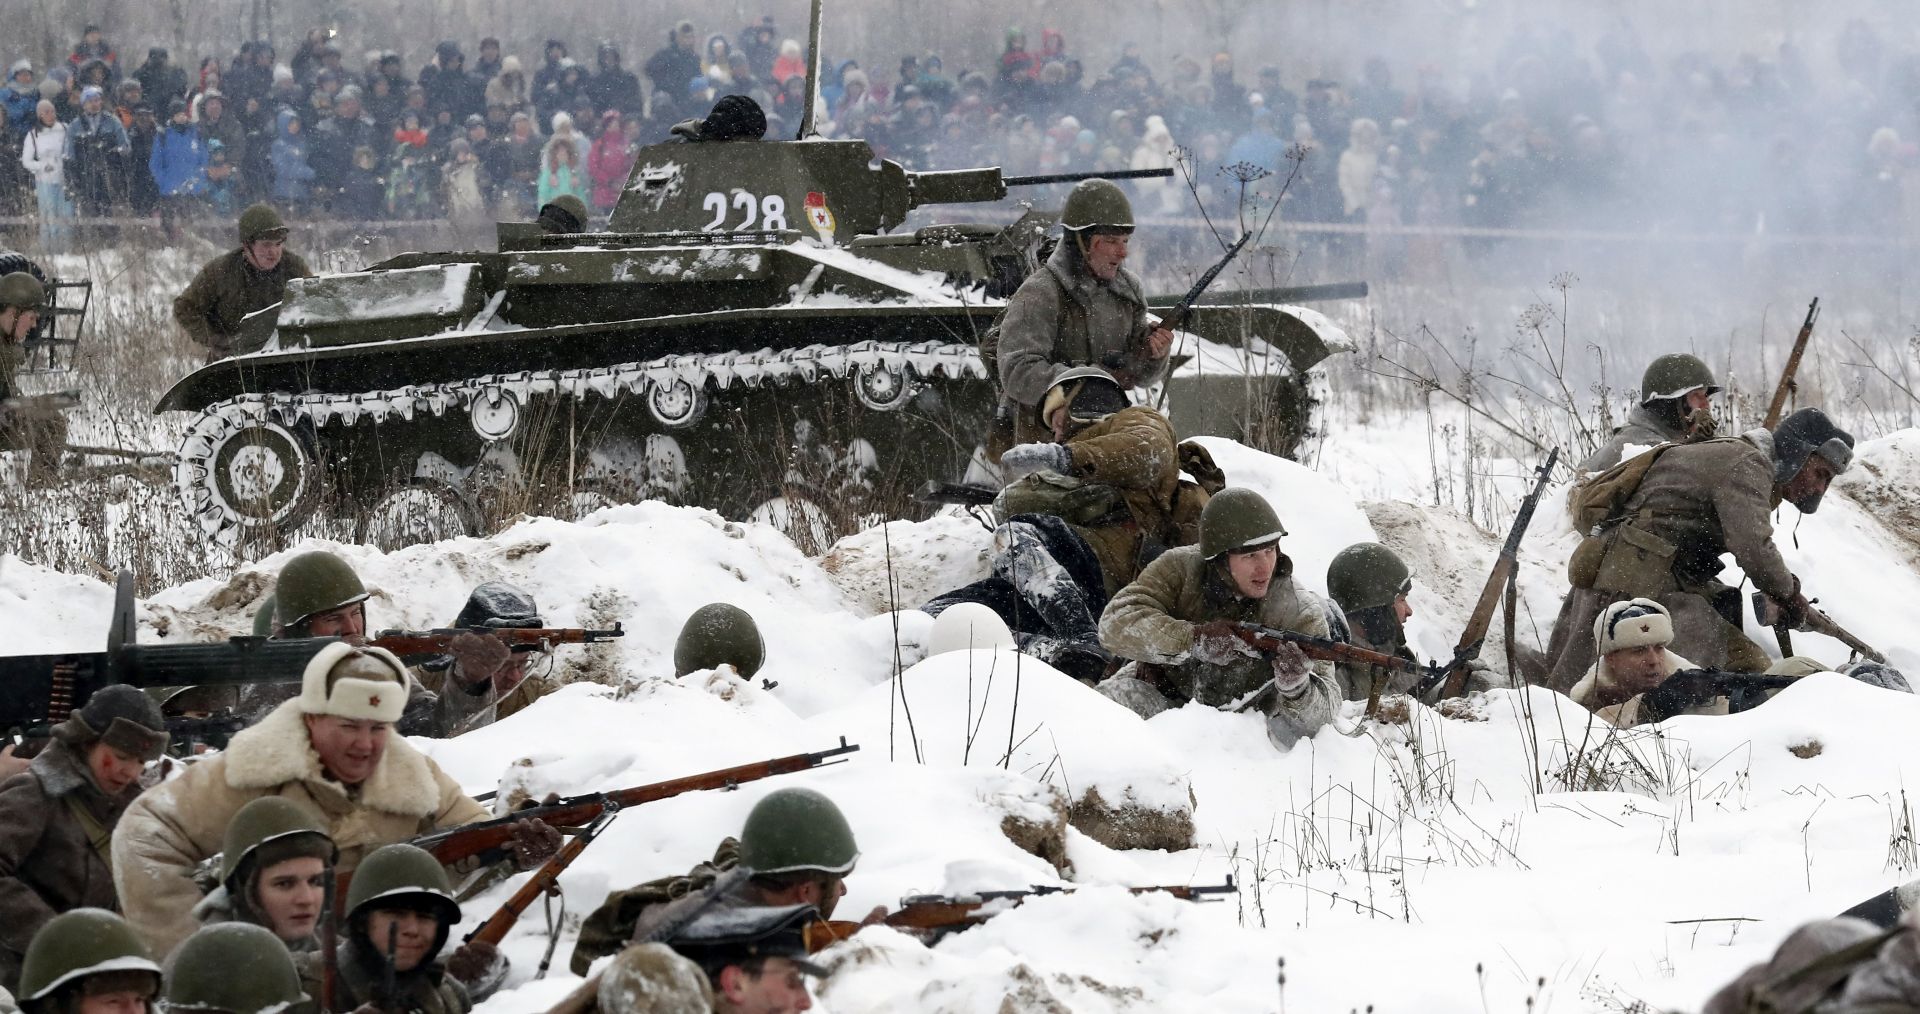 epa06460800 Members of a historical military club participate in the World War II battle re-enactment marking the 75th anniversary of the breakthrough of the Nazi Siege of Leningrad (Soviet-era name of St.Petersburg) in WWII, near village Sinyavino, outside St. Petersburg, Russia, 21 January 2018. According to various sources, up to 700,000 civilians died from hunger, cold, shelling and air bombardment in a siege that lasted 900 days.  EPA/ANATOLY MALTSEV